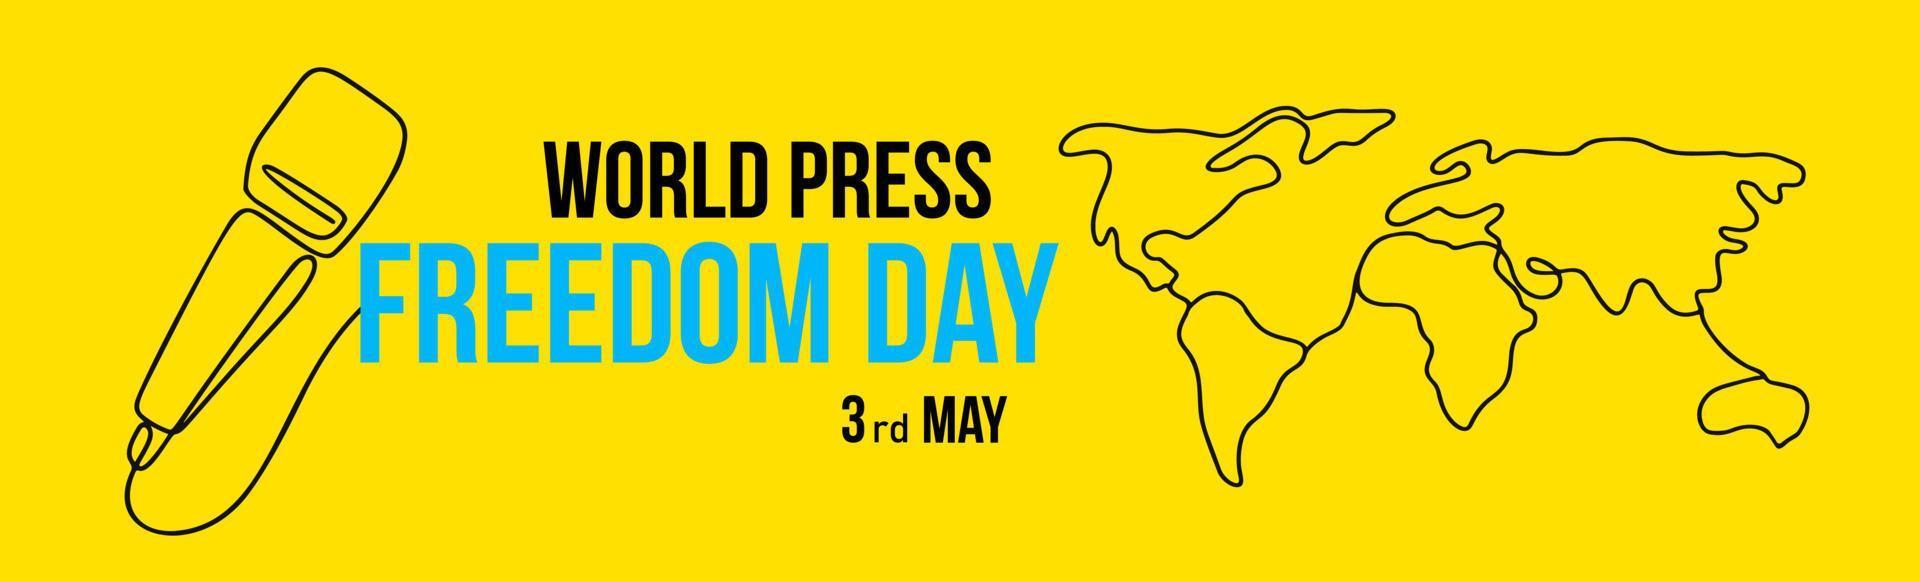 Illustration of microphone and world map for World Press Freedom Day in line art style on yellow background vector